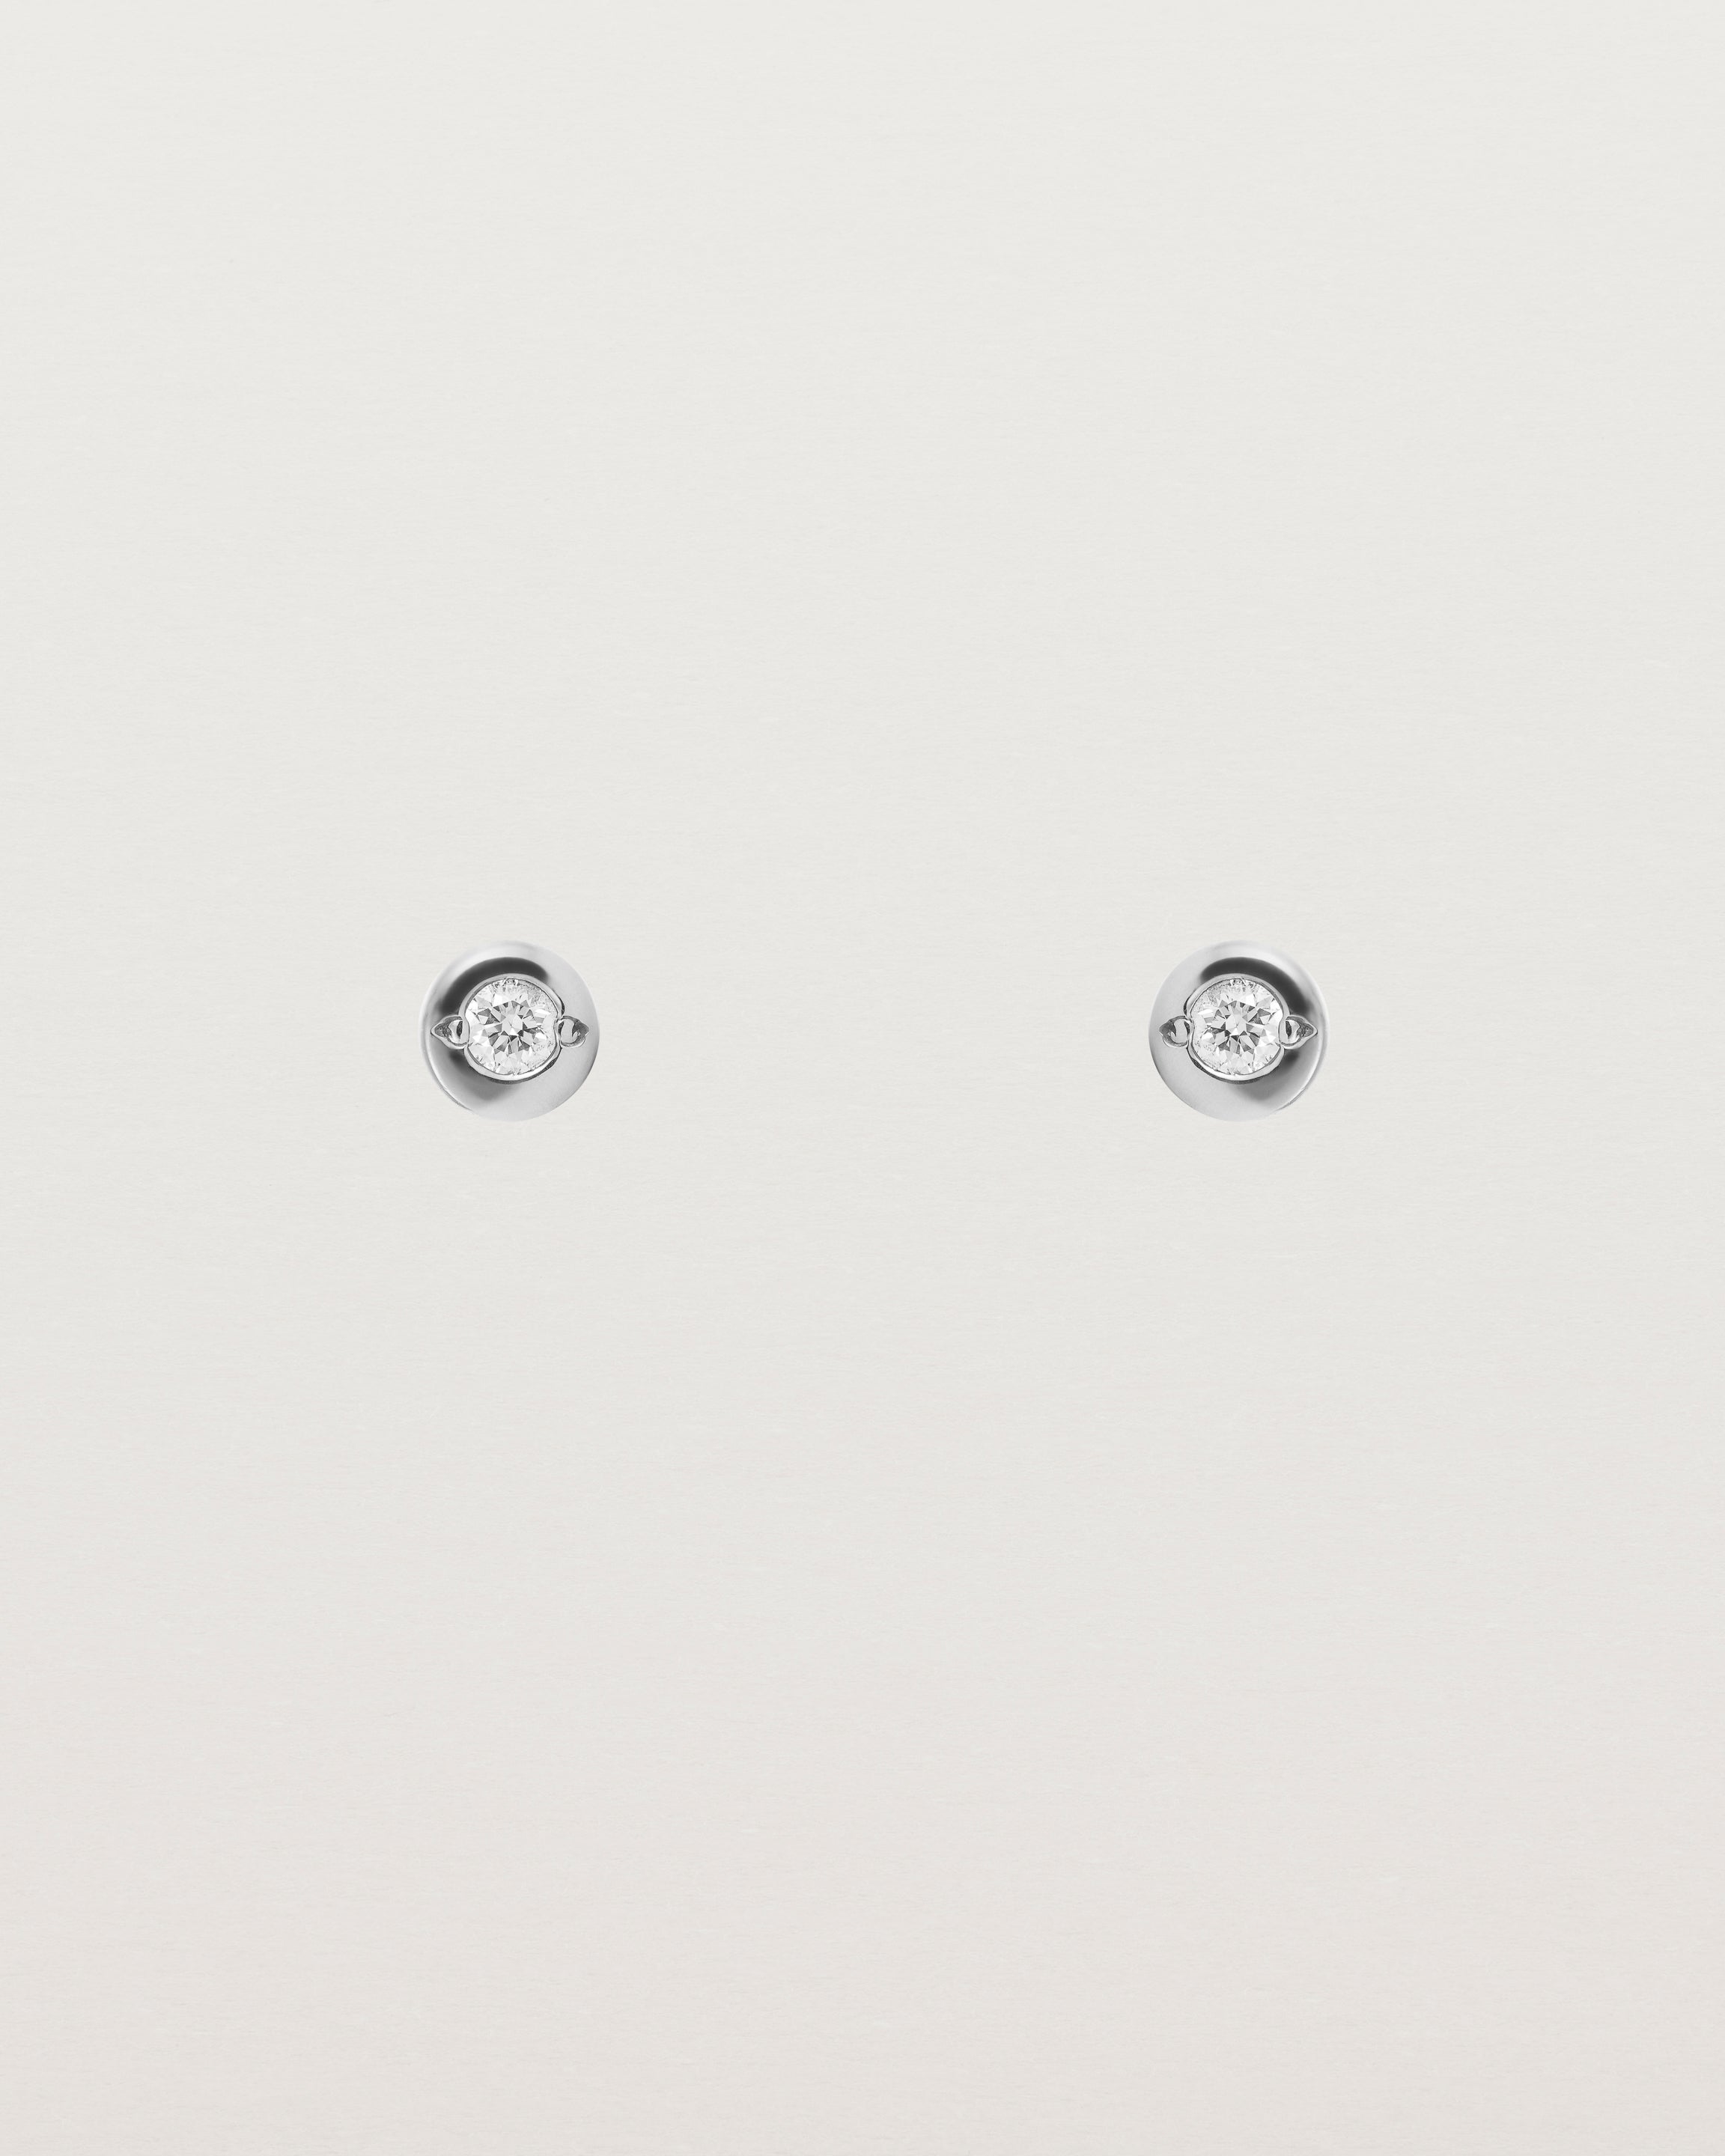 A small circular white gold stud featuring a white diamond